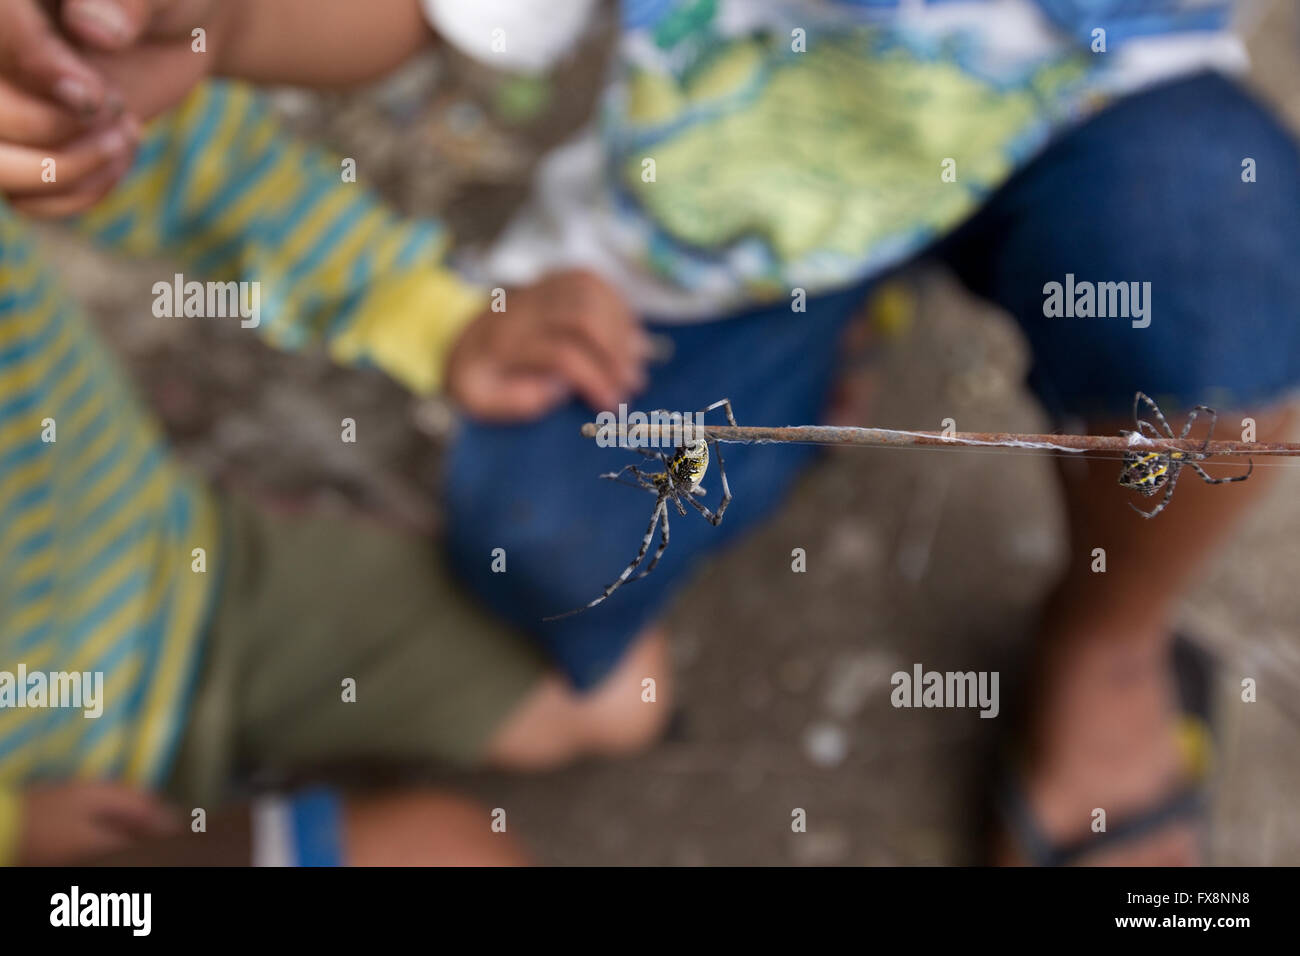 Filipino children participating in a game of spider fighting. Stock Photo